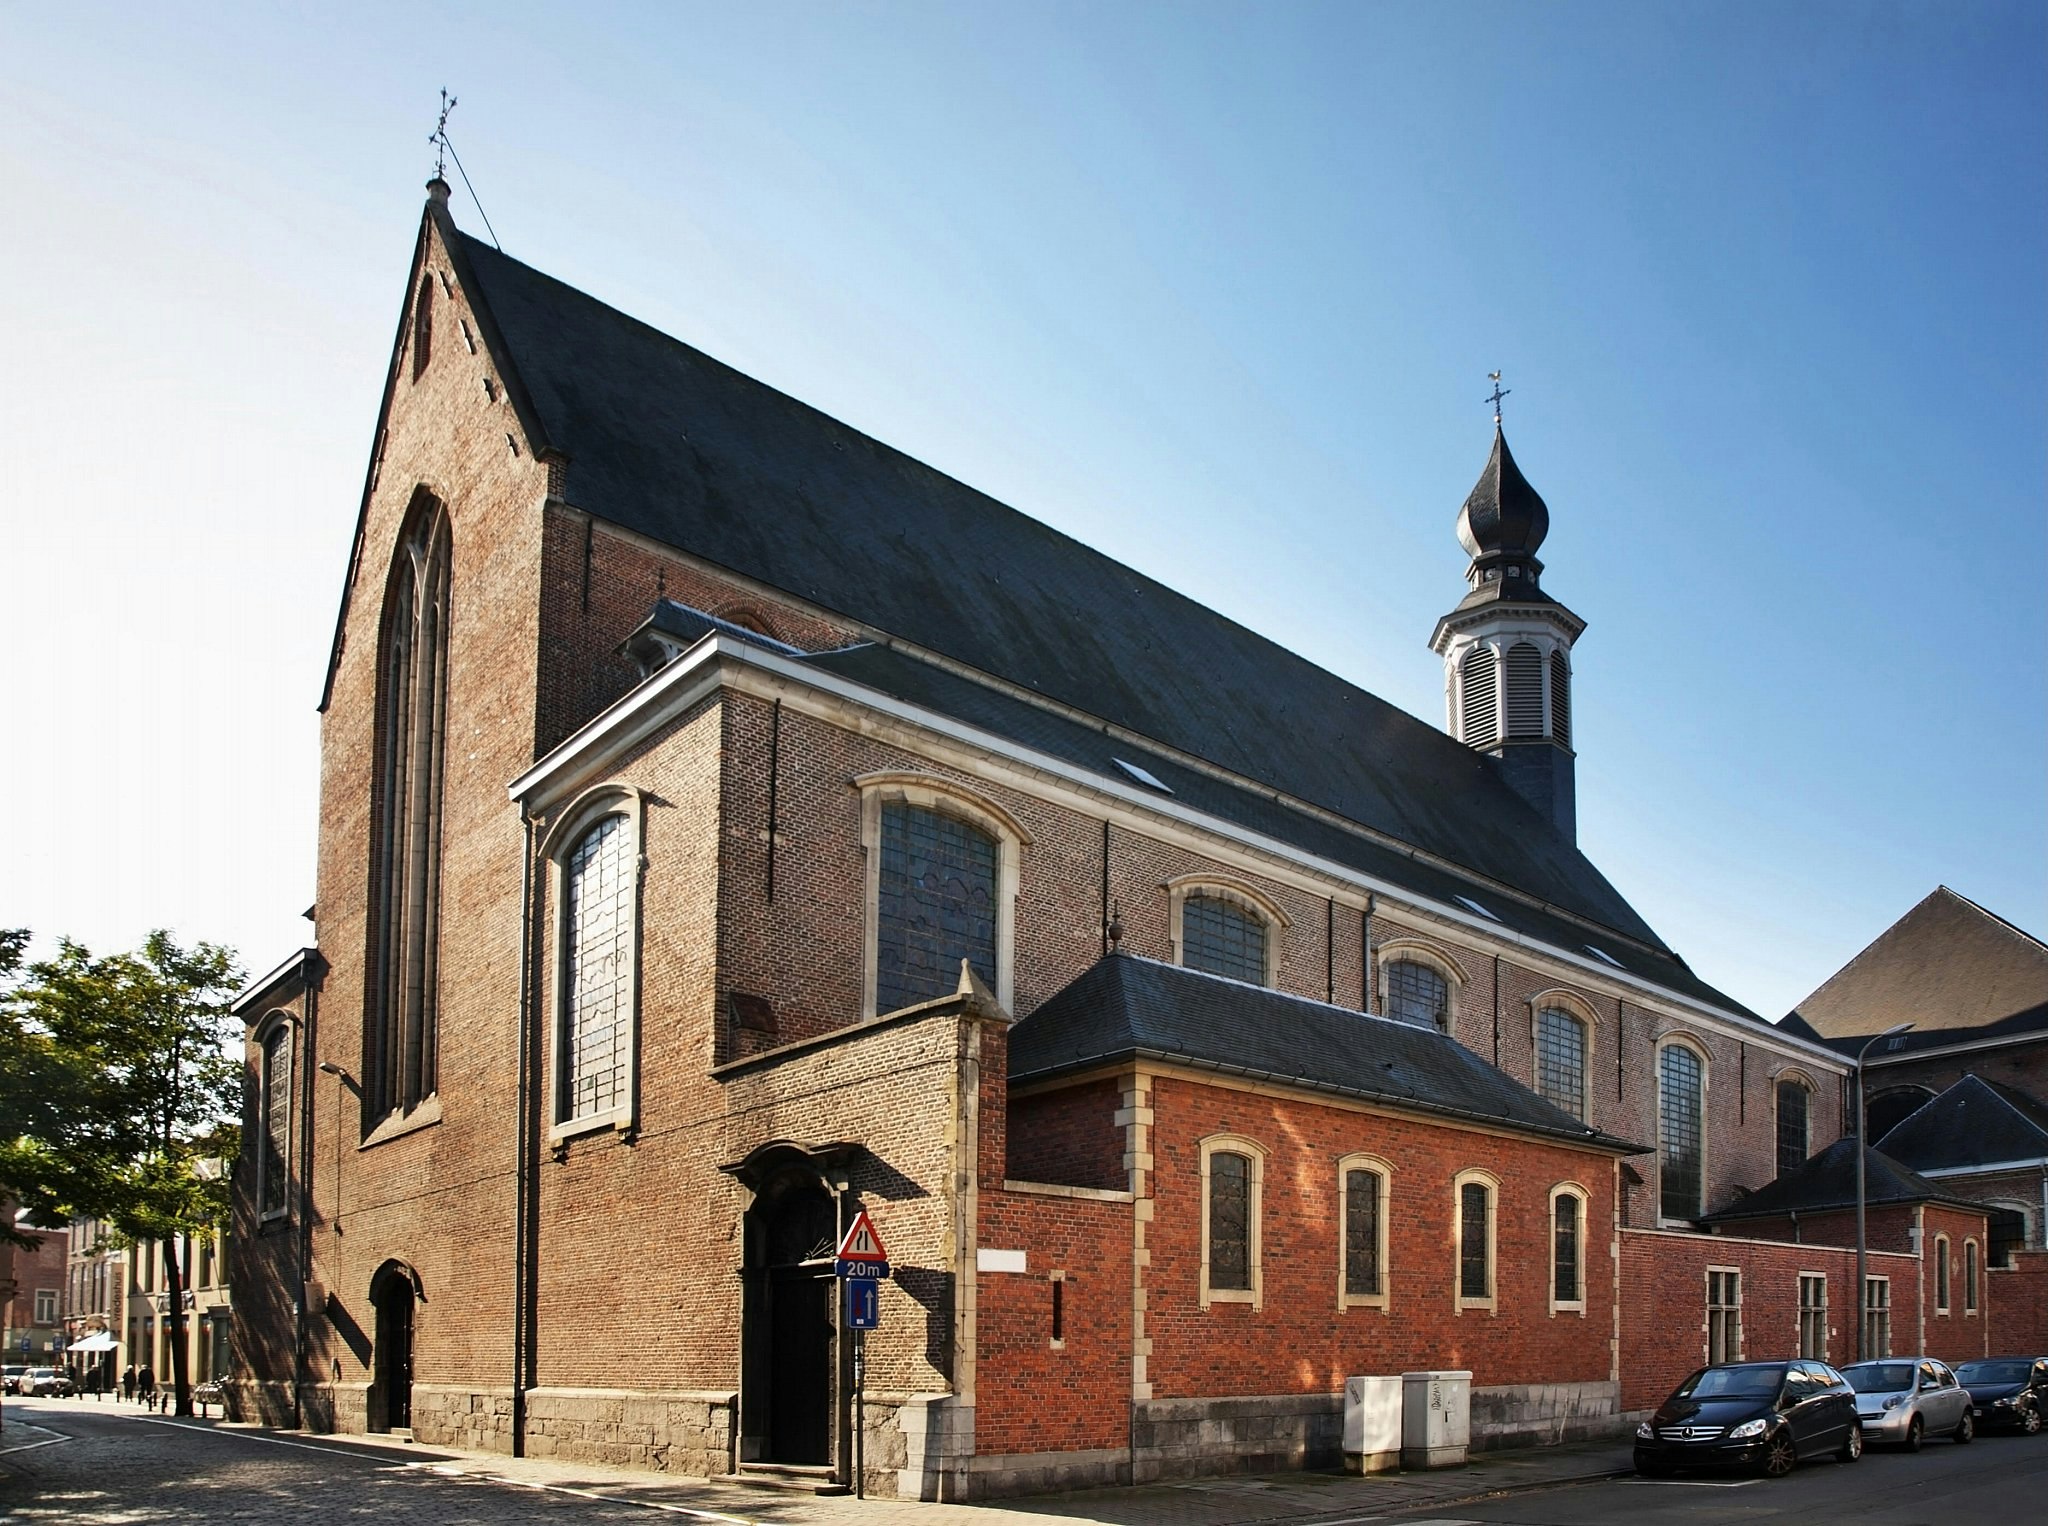 The red-brick exterior of the Augustinian Monastery in Ghent.